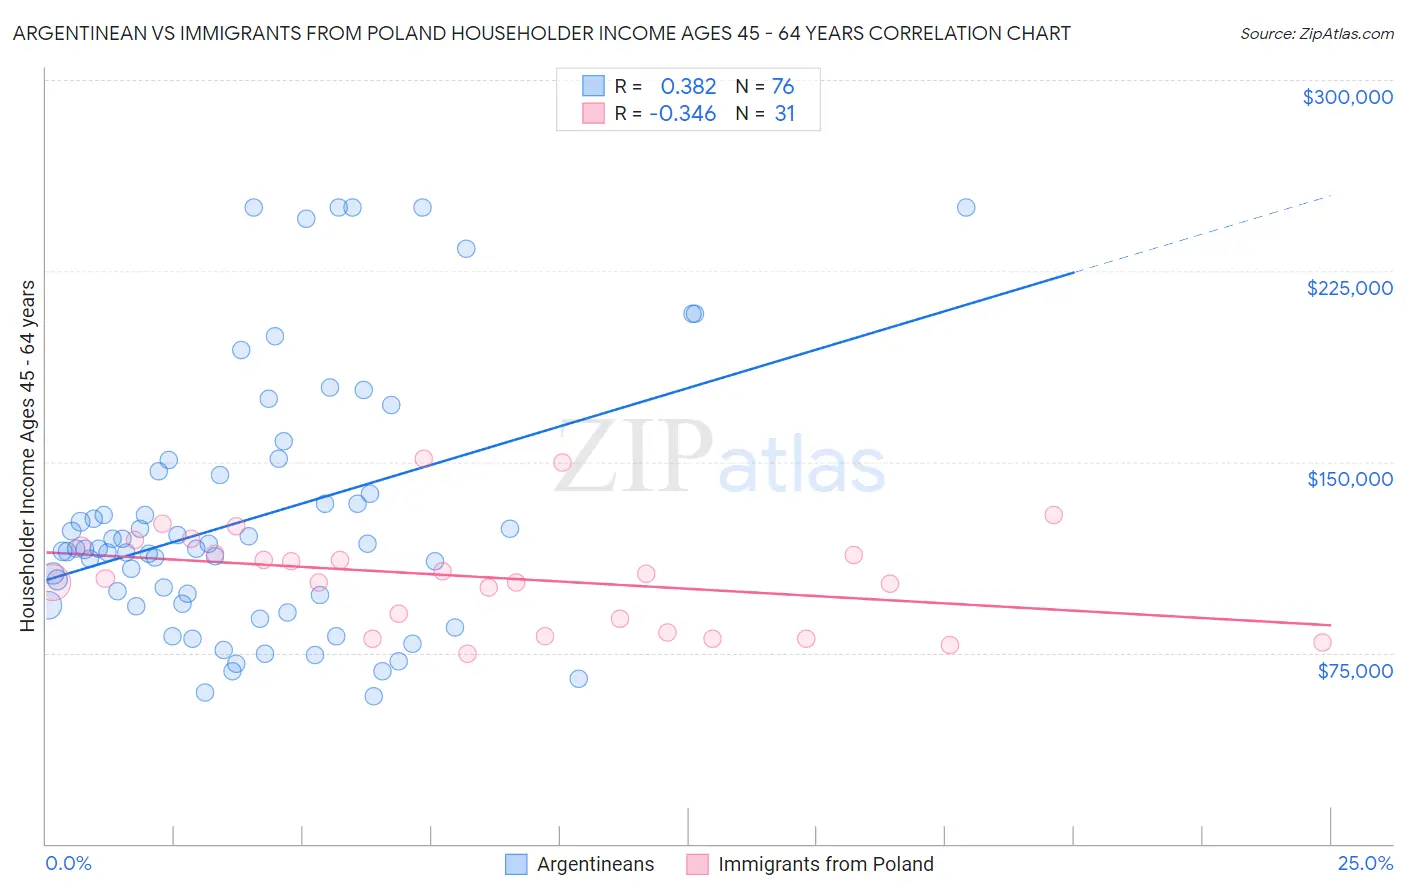 Argentinean vs Immigrants from Poland Householder Income Ages 45 - 64 years